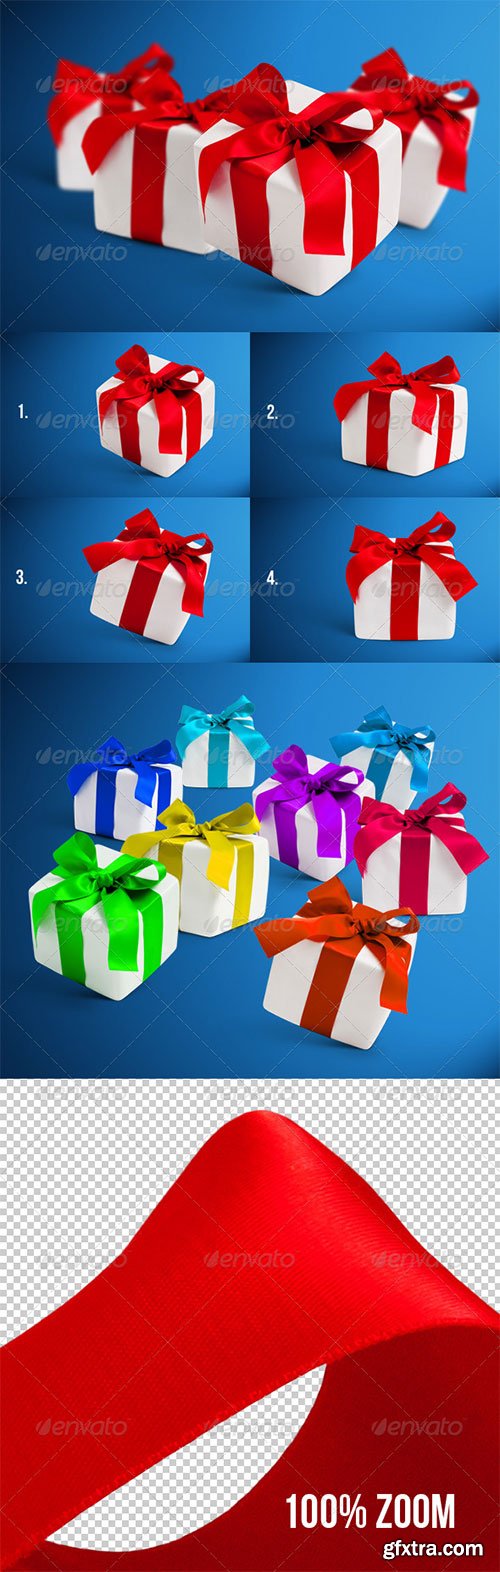 GraphicRiver - 4 Gift Boxes with Shadows Photorealistic